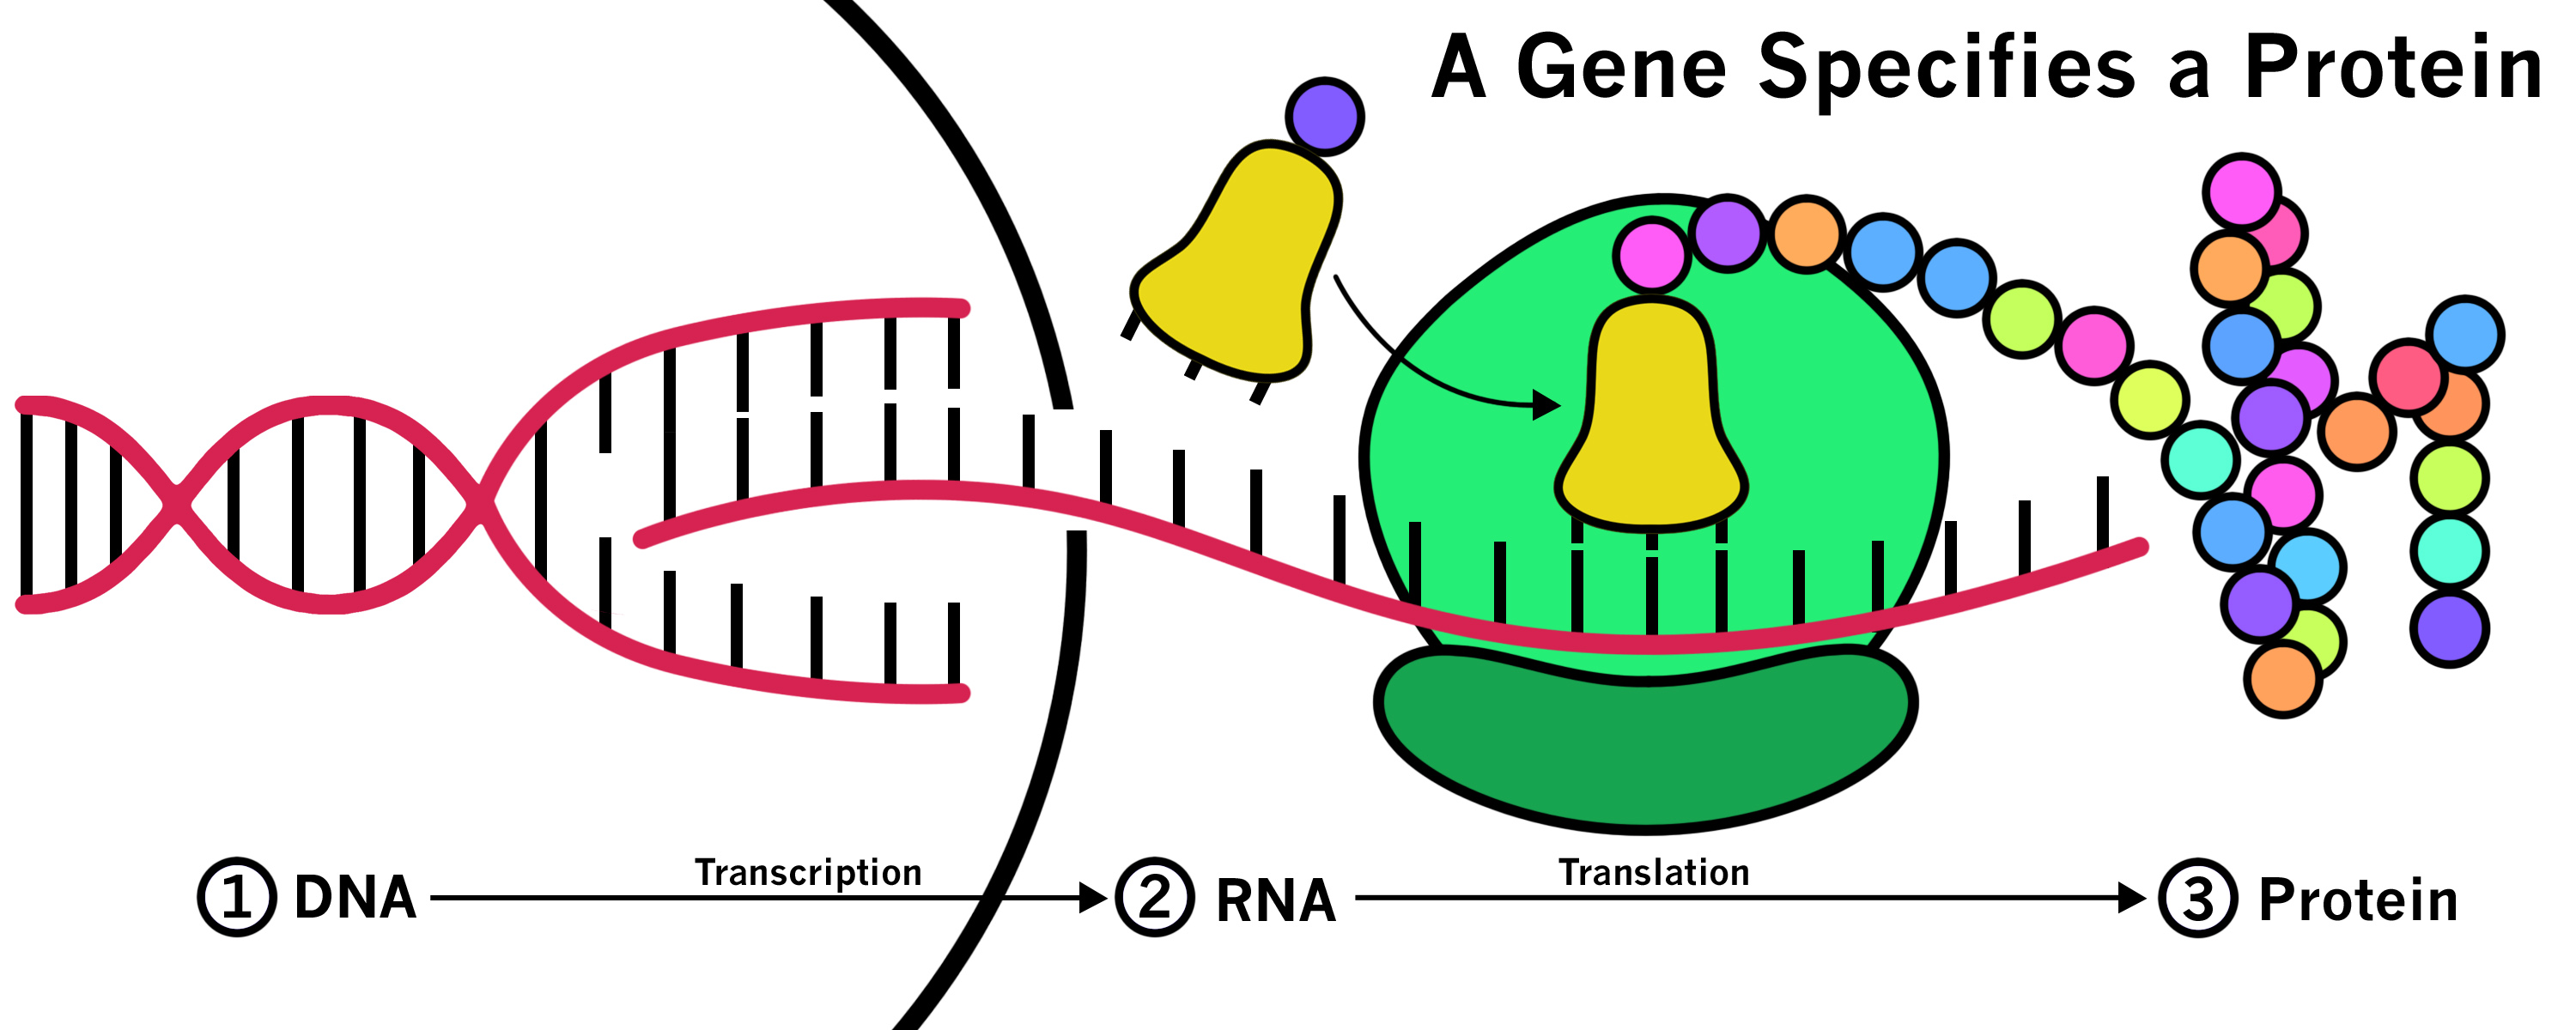 Stages in gene expression: (1) The DNA in a gene is copied, or transcribed, into messenger RNA, a highly similar molecule which is then exported from the nucleus. (2) Once in the cytoplasm, the information within the messenger RNA is decoded, or translated, into proteins (3) by the ribosome (green) which uses transfer RNAs (yellow) loaded with individual amino acids (colored). In squid, octopus, and cuttlefish, a great deal of genetic information is edited in RNA transcripts, just prior to translation. Illustration by Alana Thurston